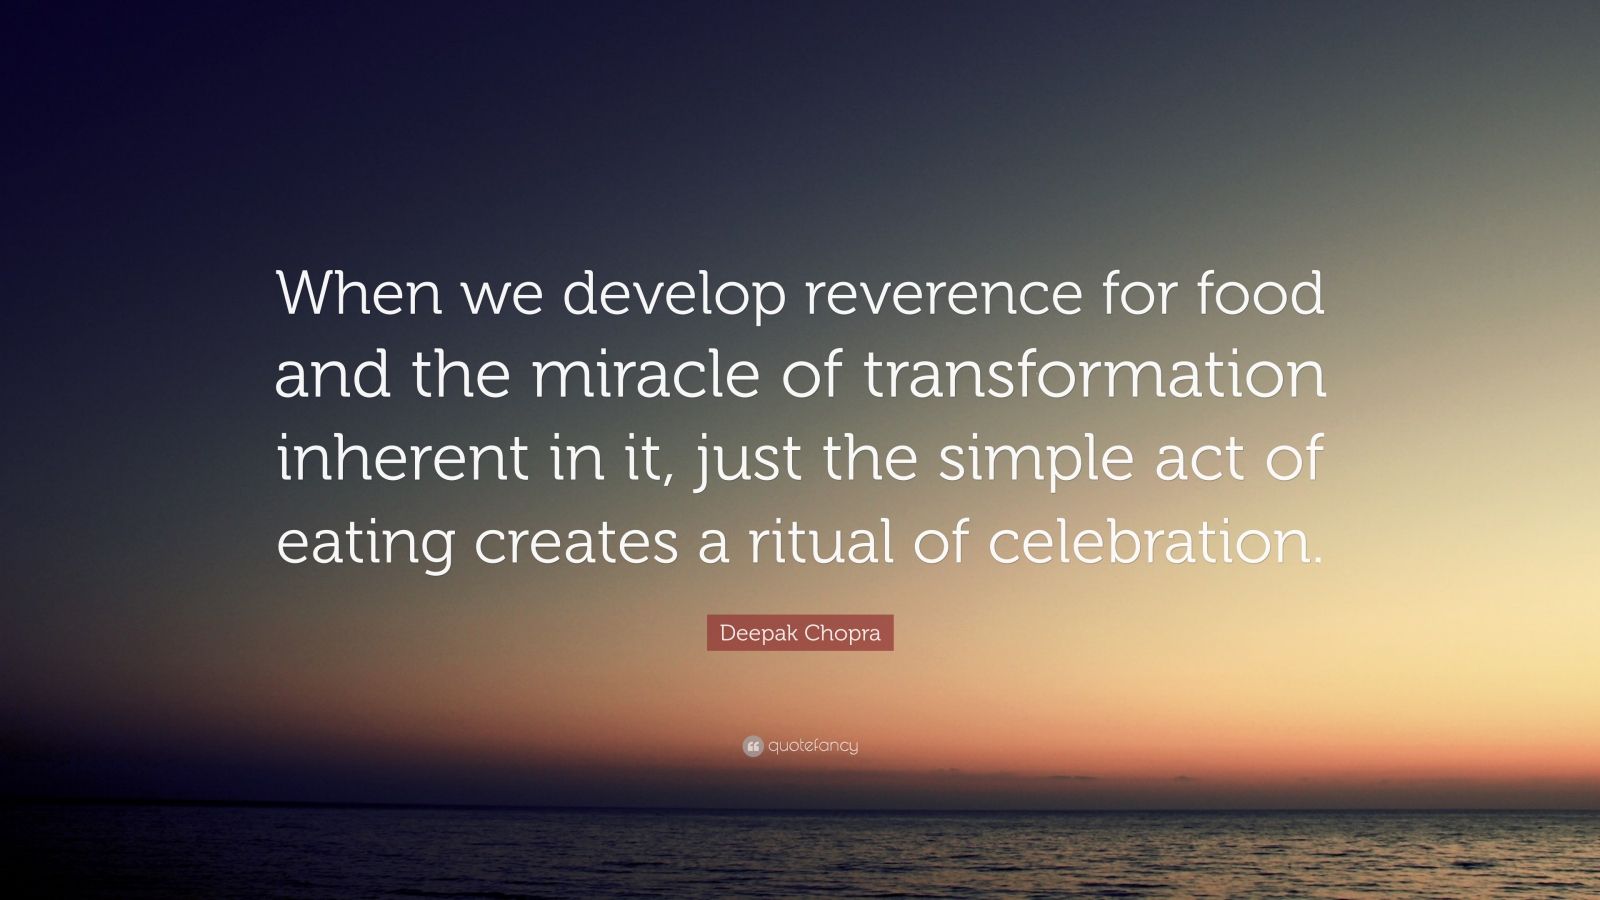 Deepak Chopra Quote: “When we develop reverence for food and the miracle of transformation inherent in it, just the simple act of eating creates a ritual of celebration.”